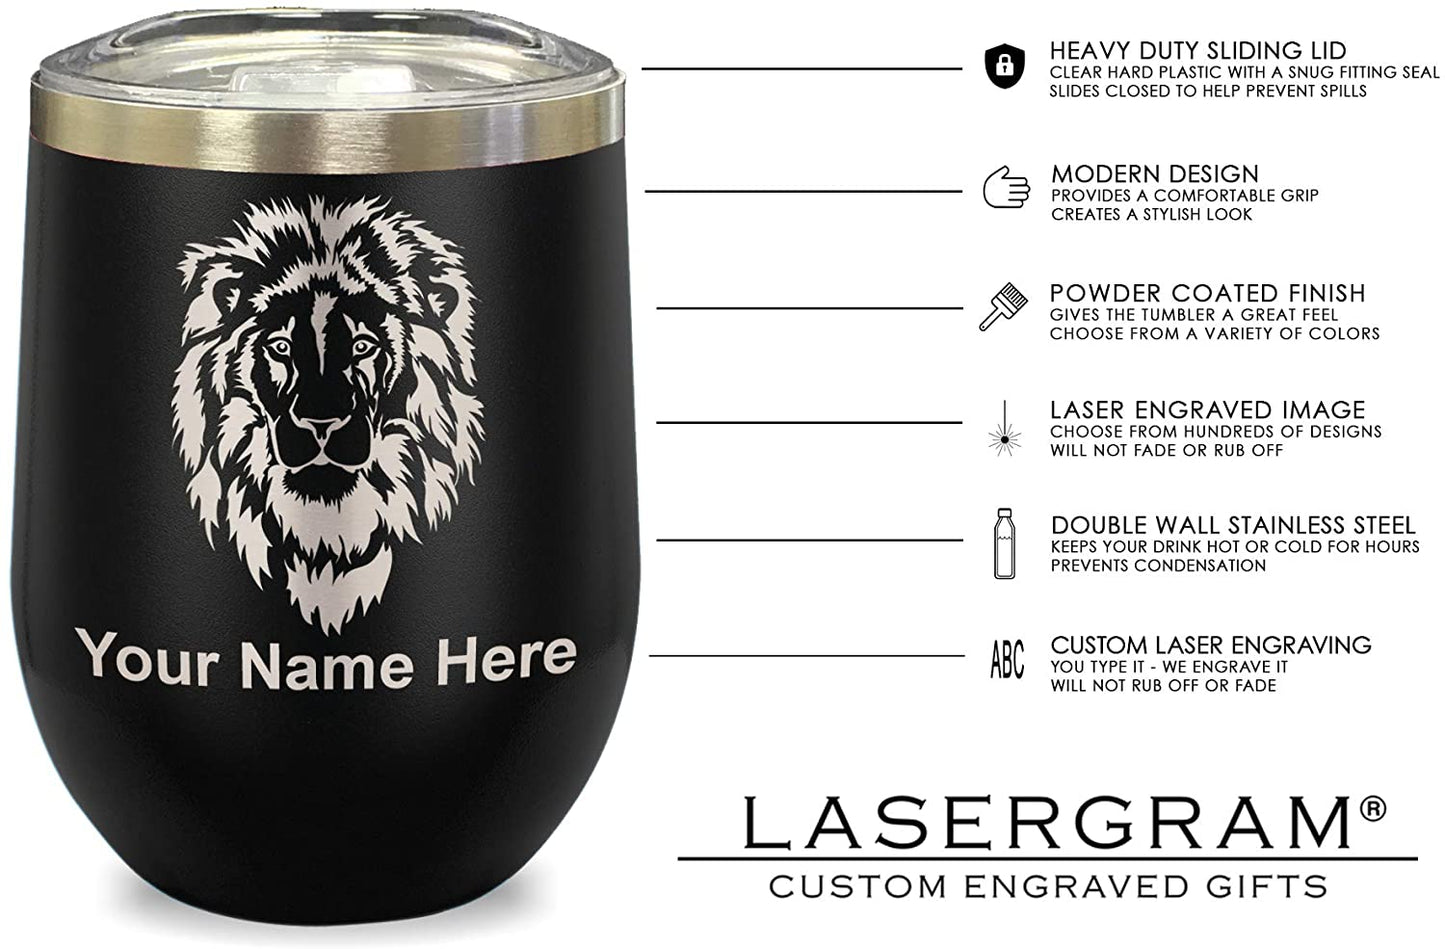 LaserGram Double Wall Stainless Steel Wine Glass, Zodiac Sign Sagittarius, Personalized Engraving Included